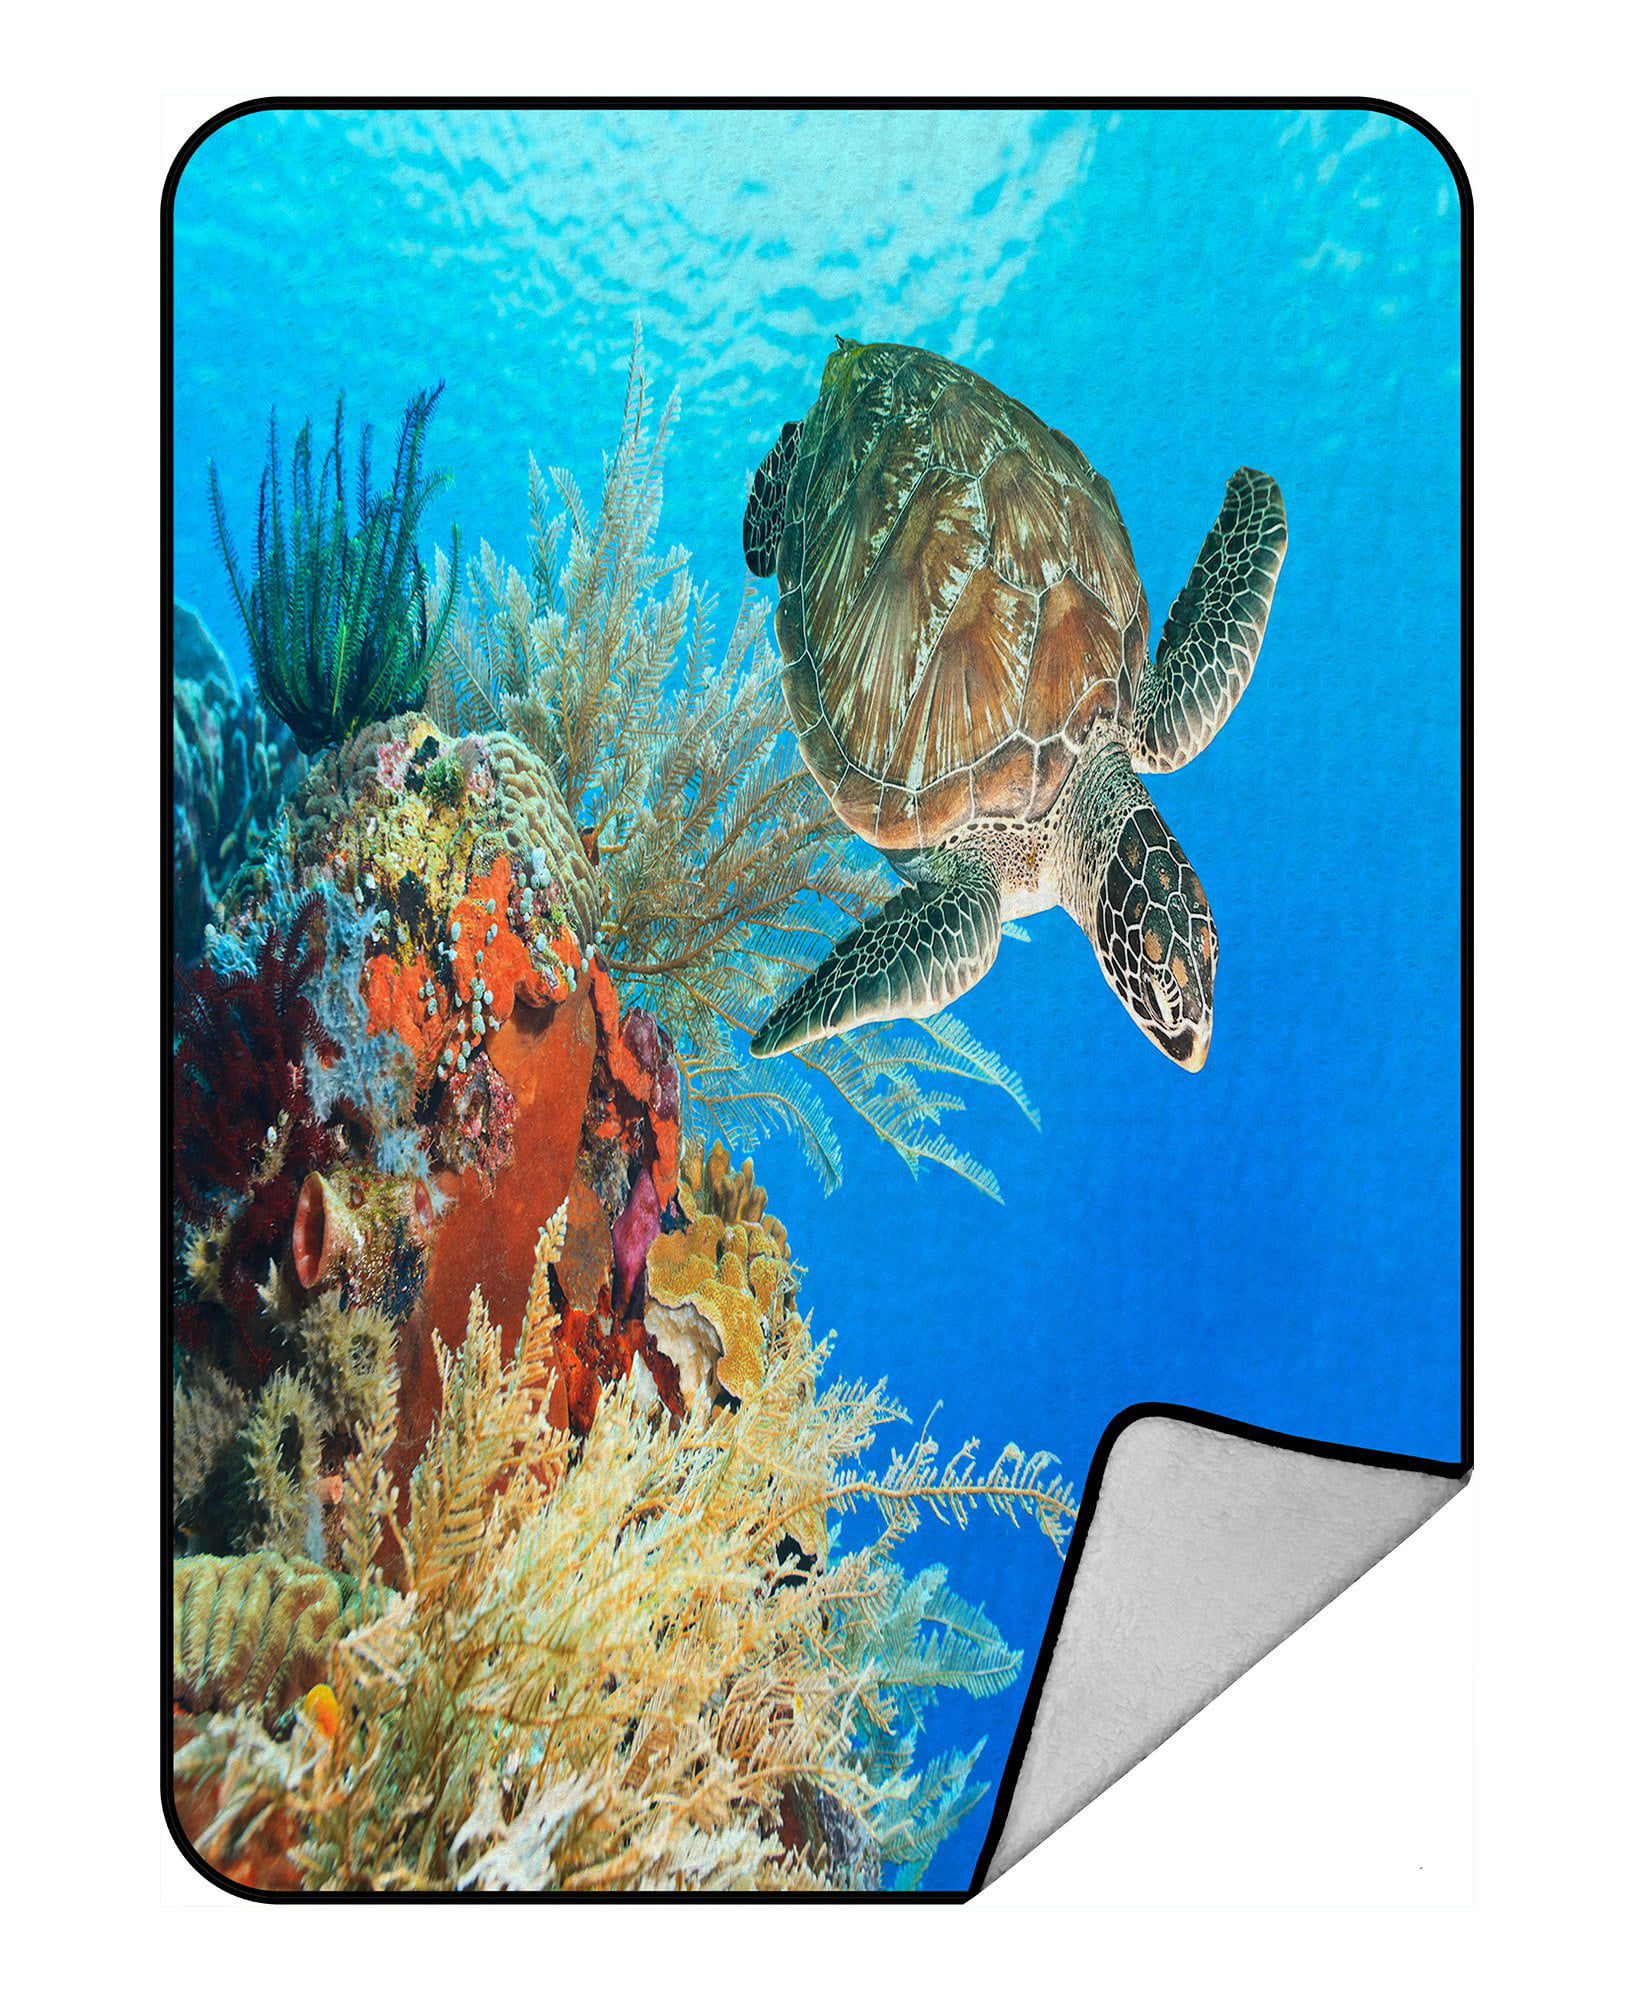 Ambesonne Nautical Soft Flannel Fleece Throw Blanket 60 x 80 Tropical Fish Underwater Plants Jellyfish and Seaweed Ocean Art Cozy Plush for Indoor and Outdoor Use Reseda Green Green